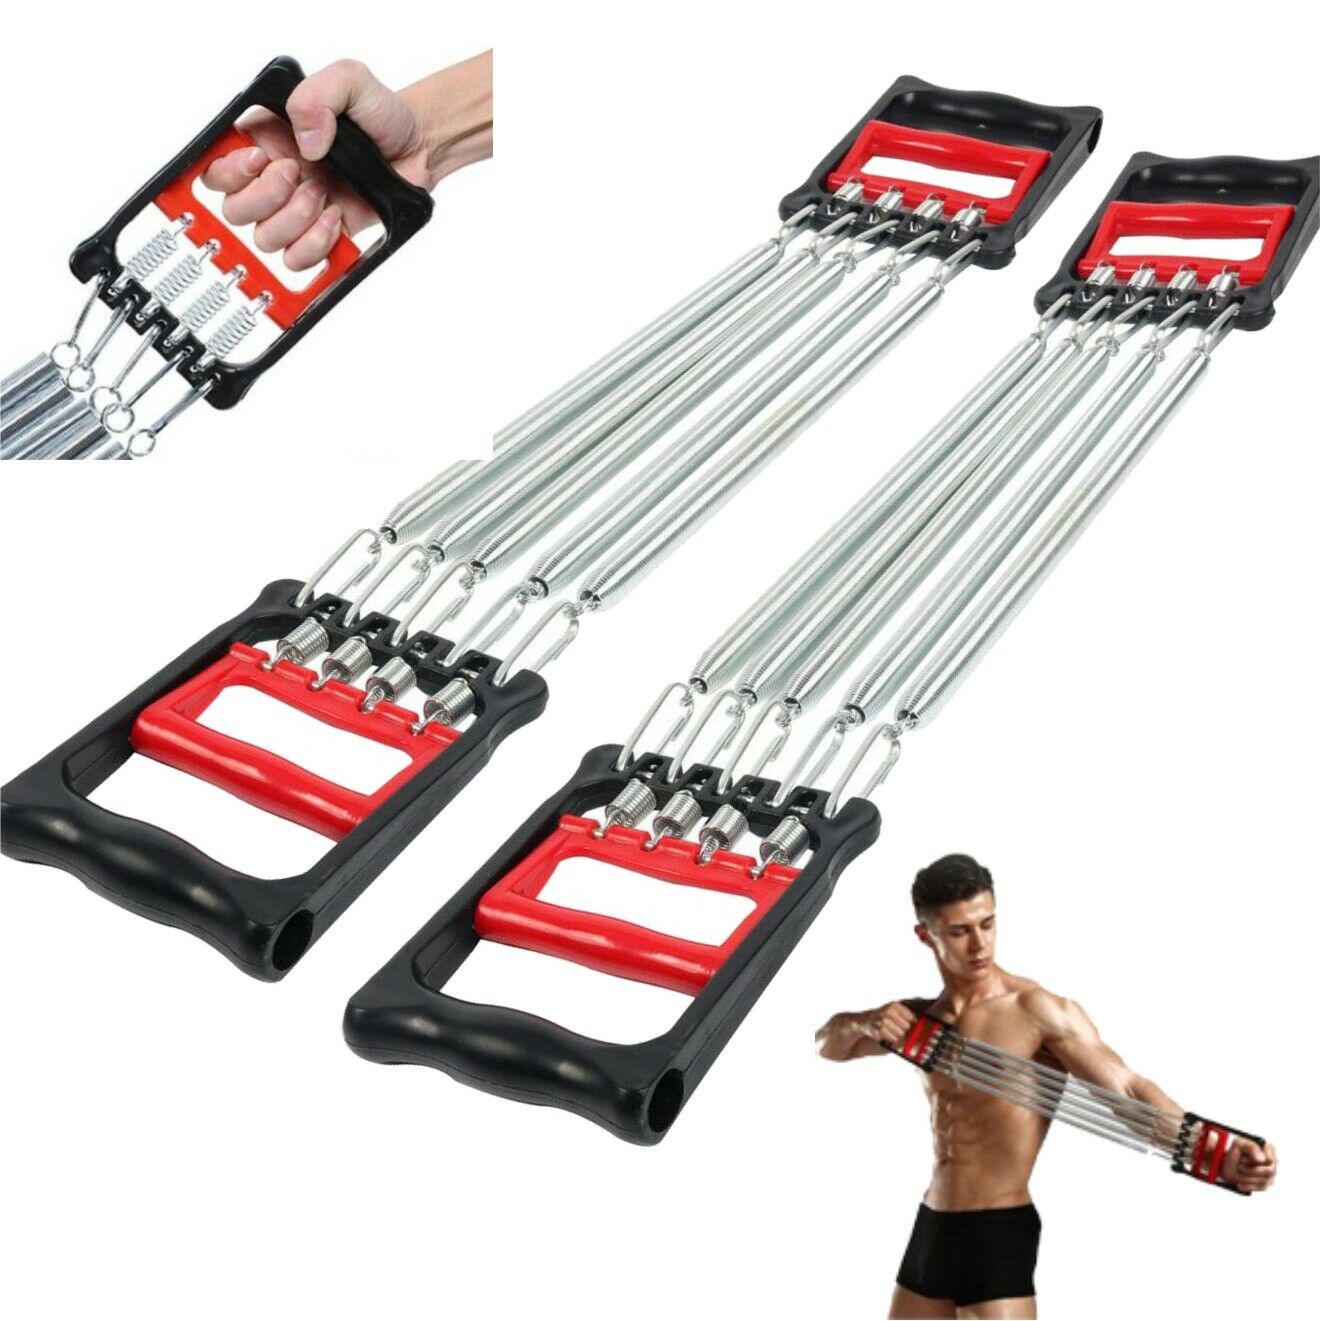 5 Spring Body Chest Expander Exercise Puller Muscle Stretcher Training Home Gym 